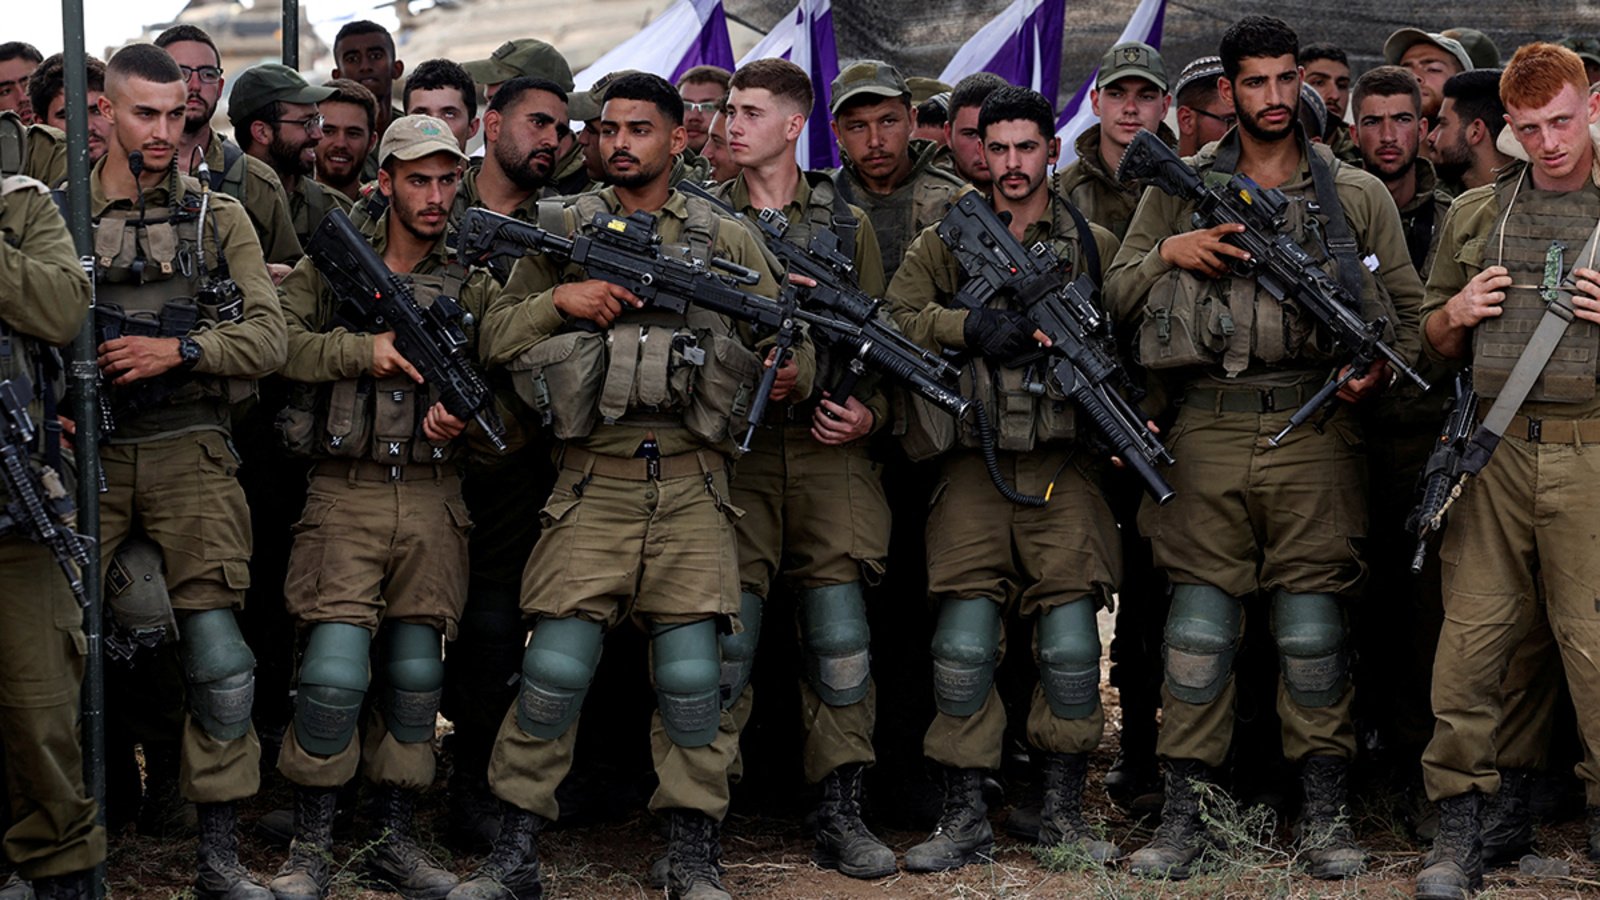 Israel-Gaza conflict: Israeli soldiers battle Hamas on second day